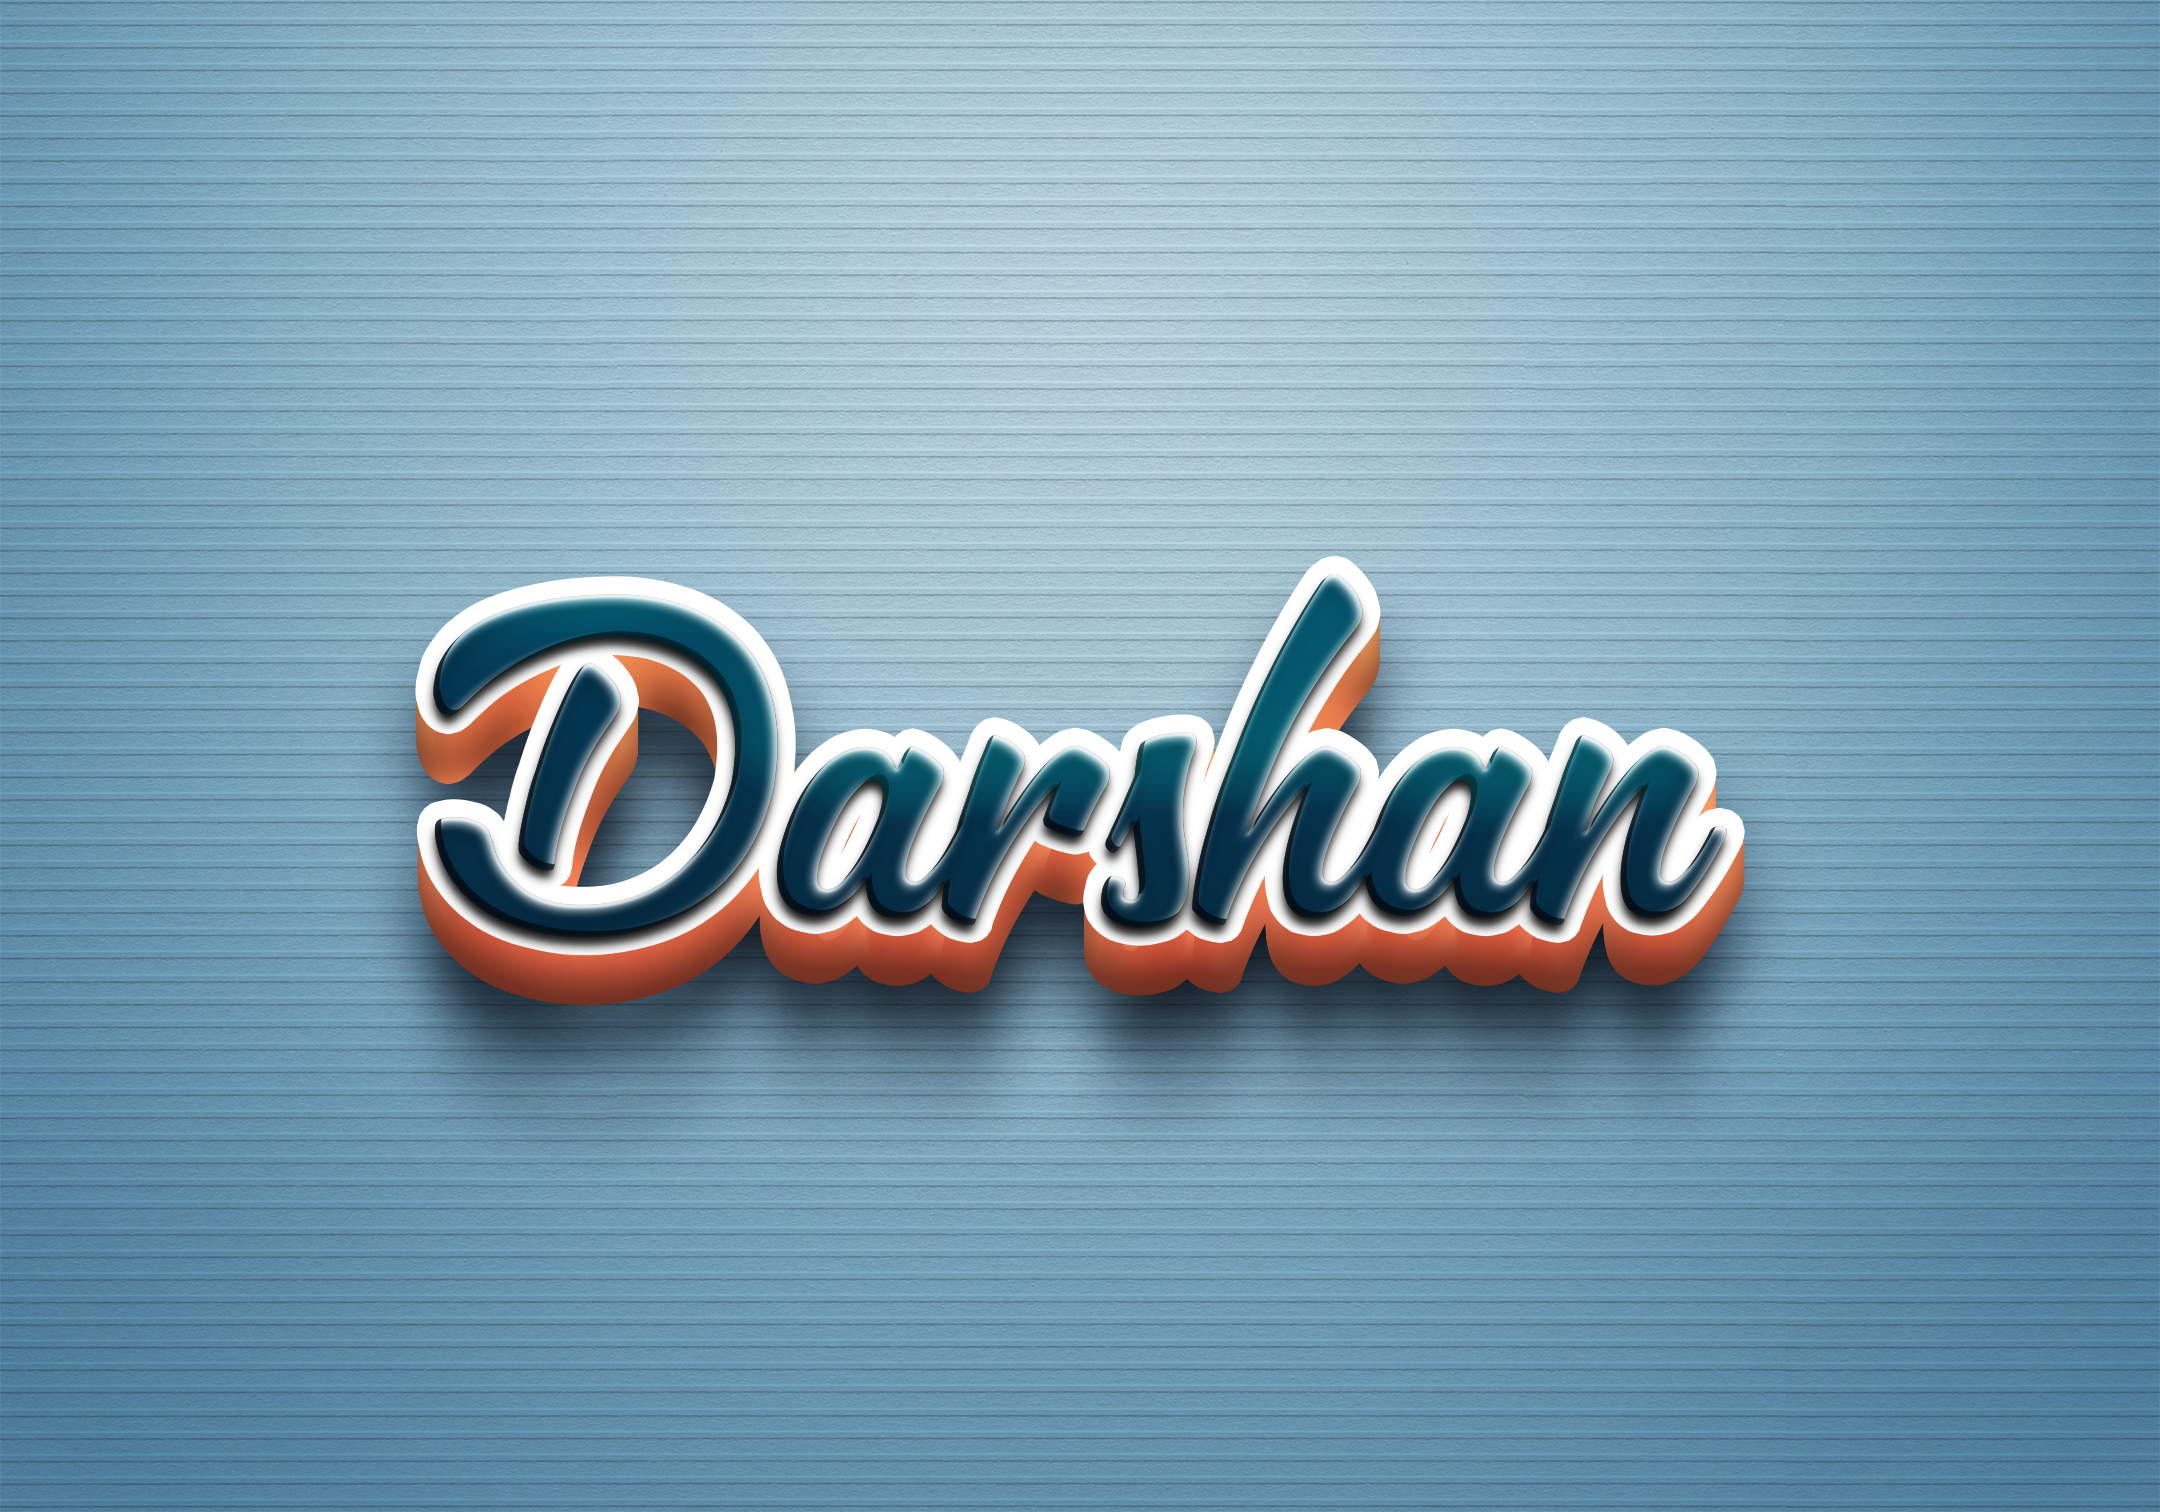 Darshan HD Wallpapers APK Download for Android - Latest Version